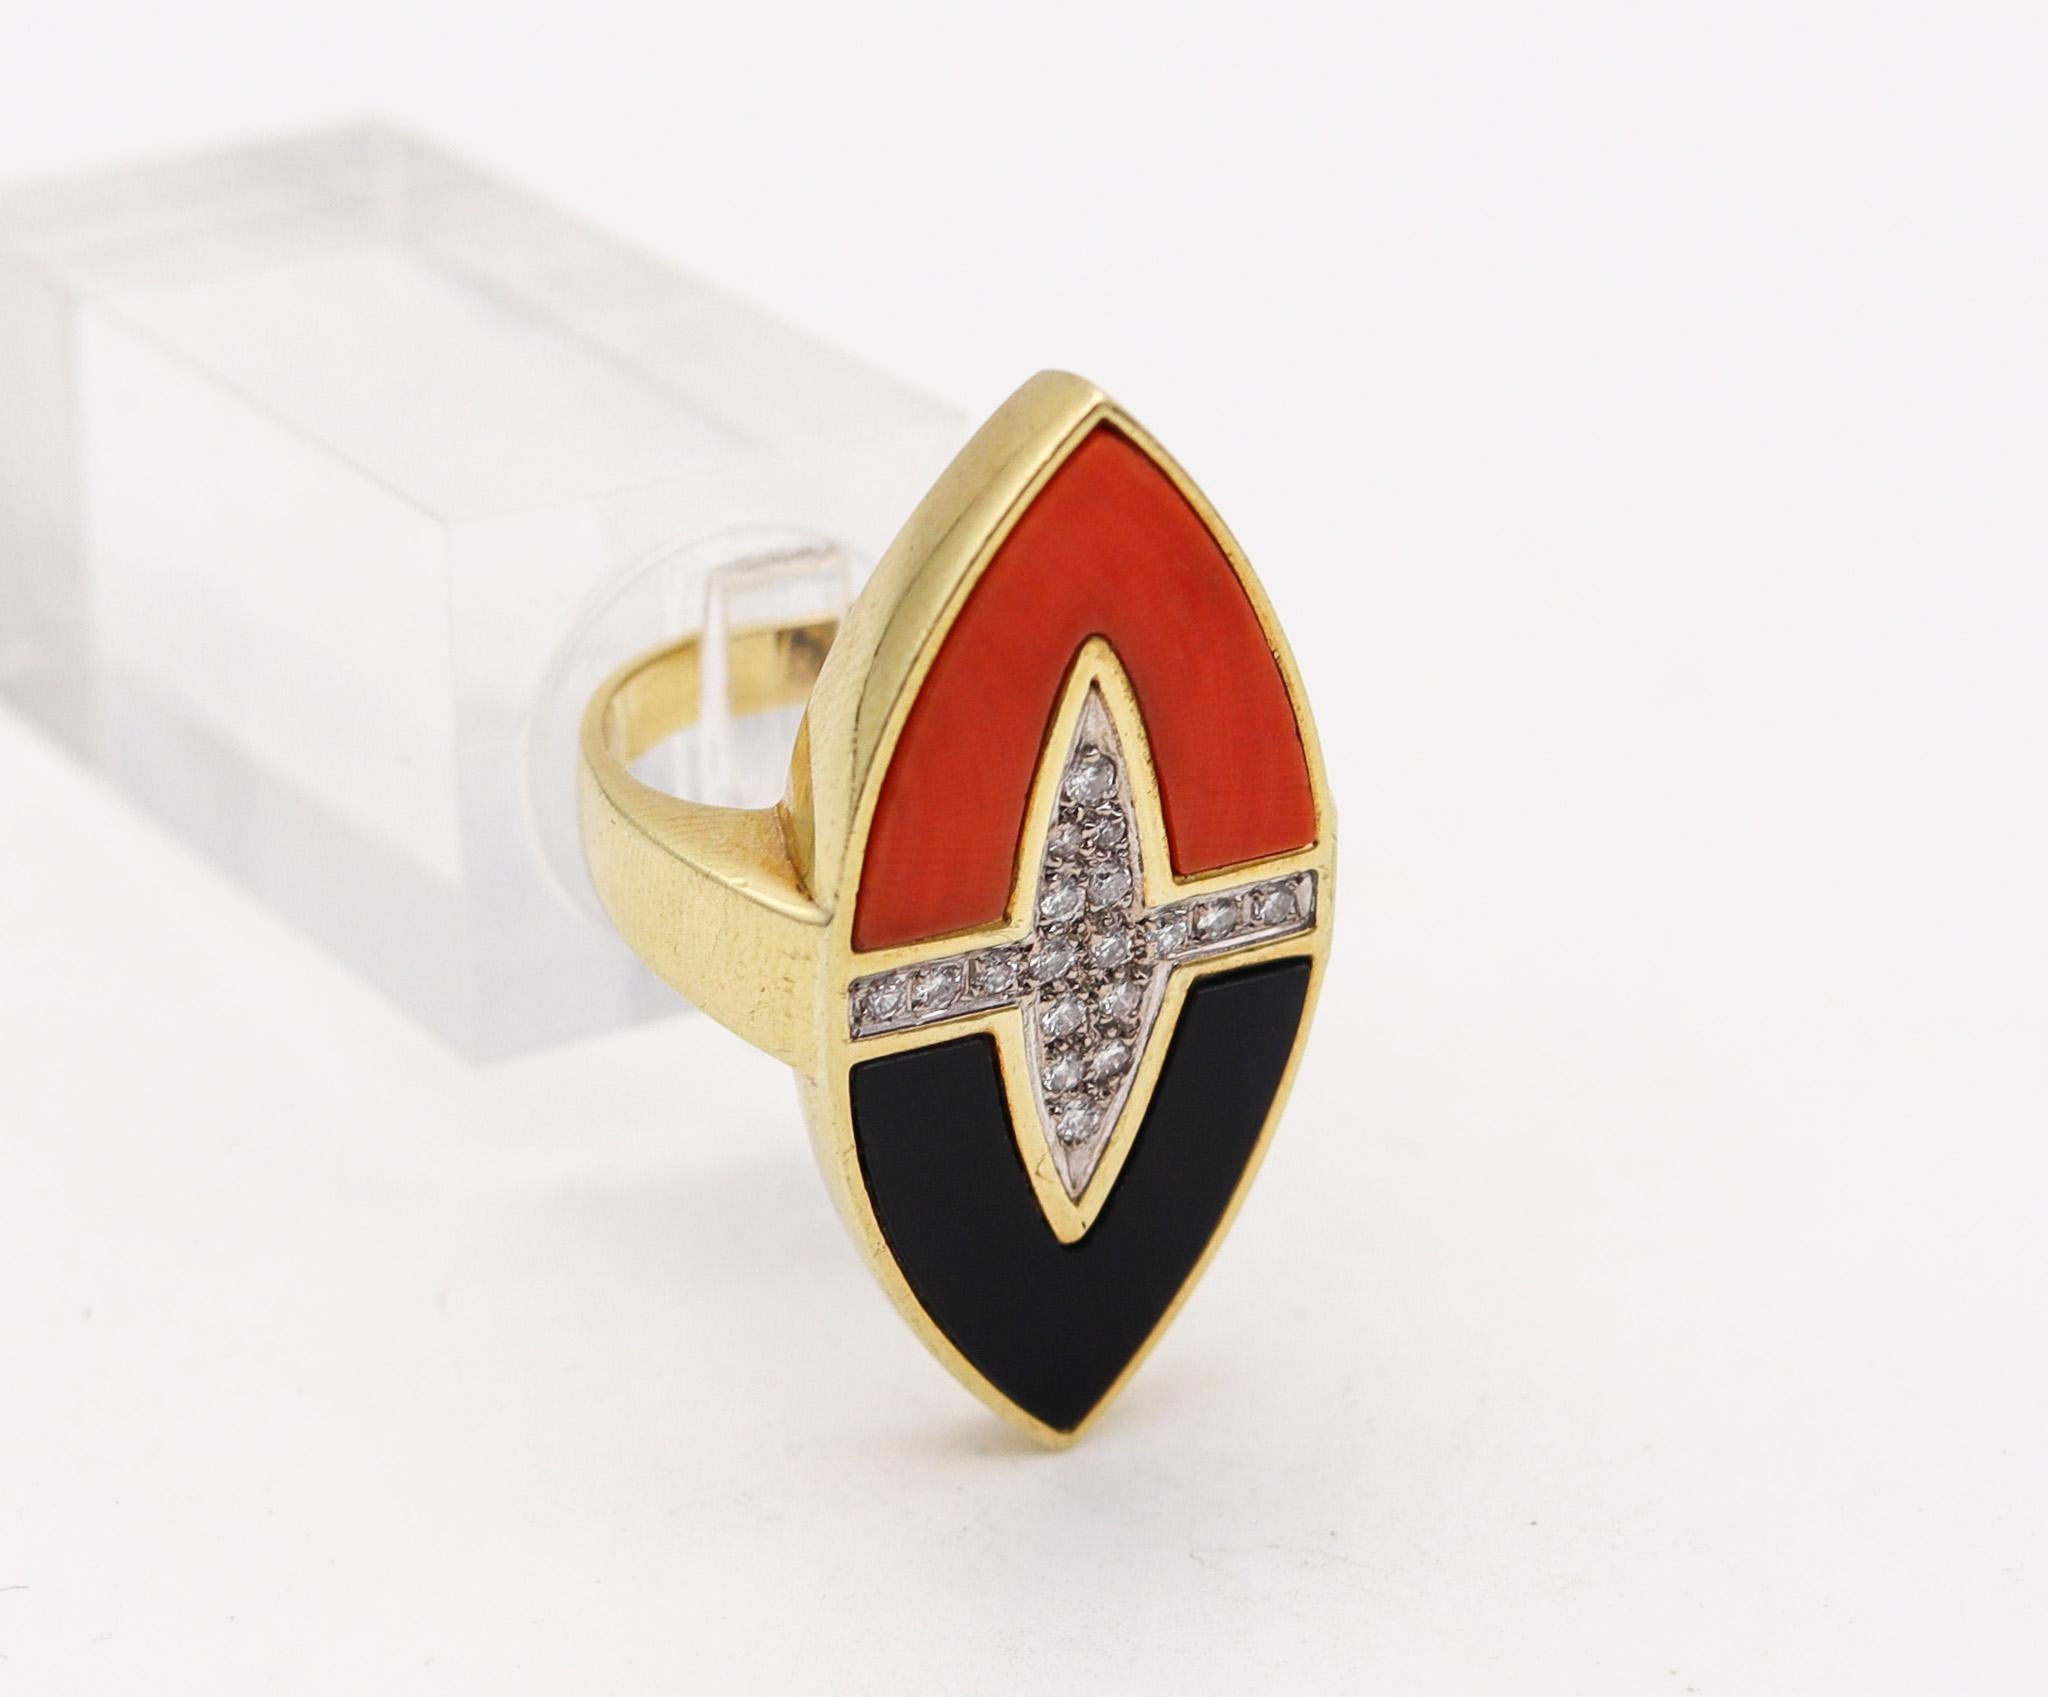 Retro Modern 1970 Sculptural Geometric Ring in 18kt Gold Diamonds Coral and Onyx In Excellent Condition For Sale In Miami, FL